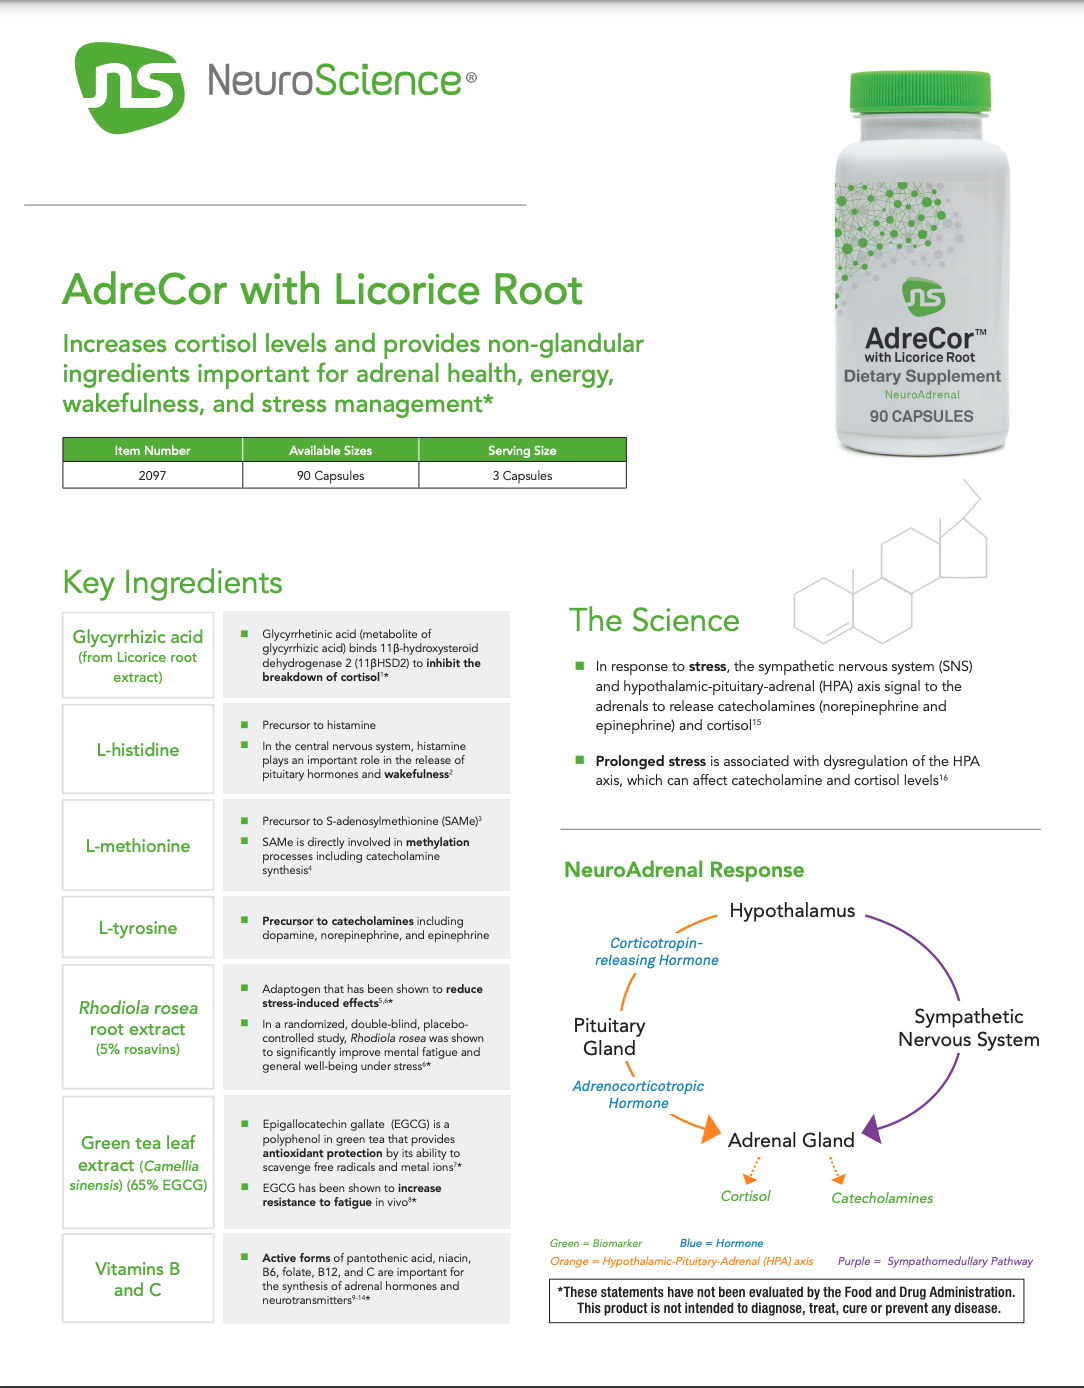 adrecor-licorice-root-1.png